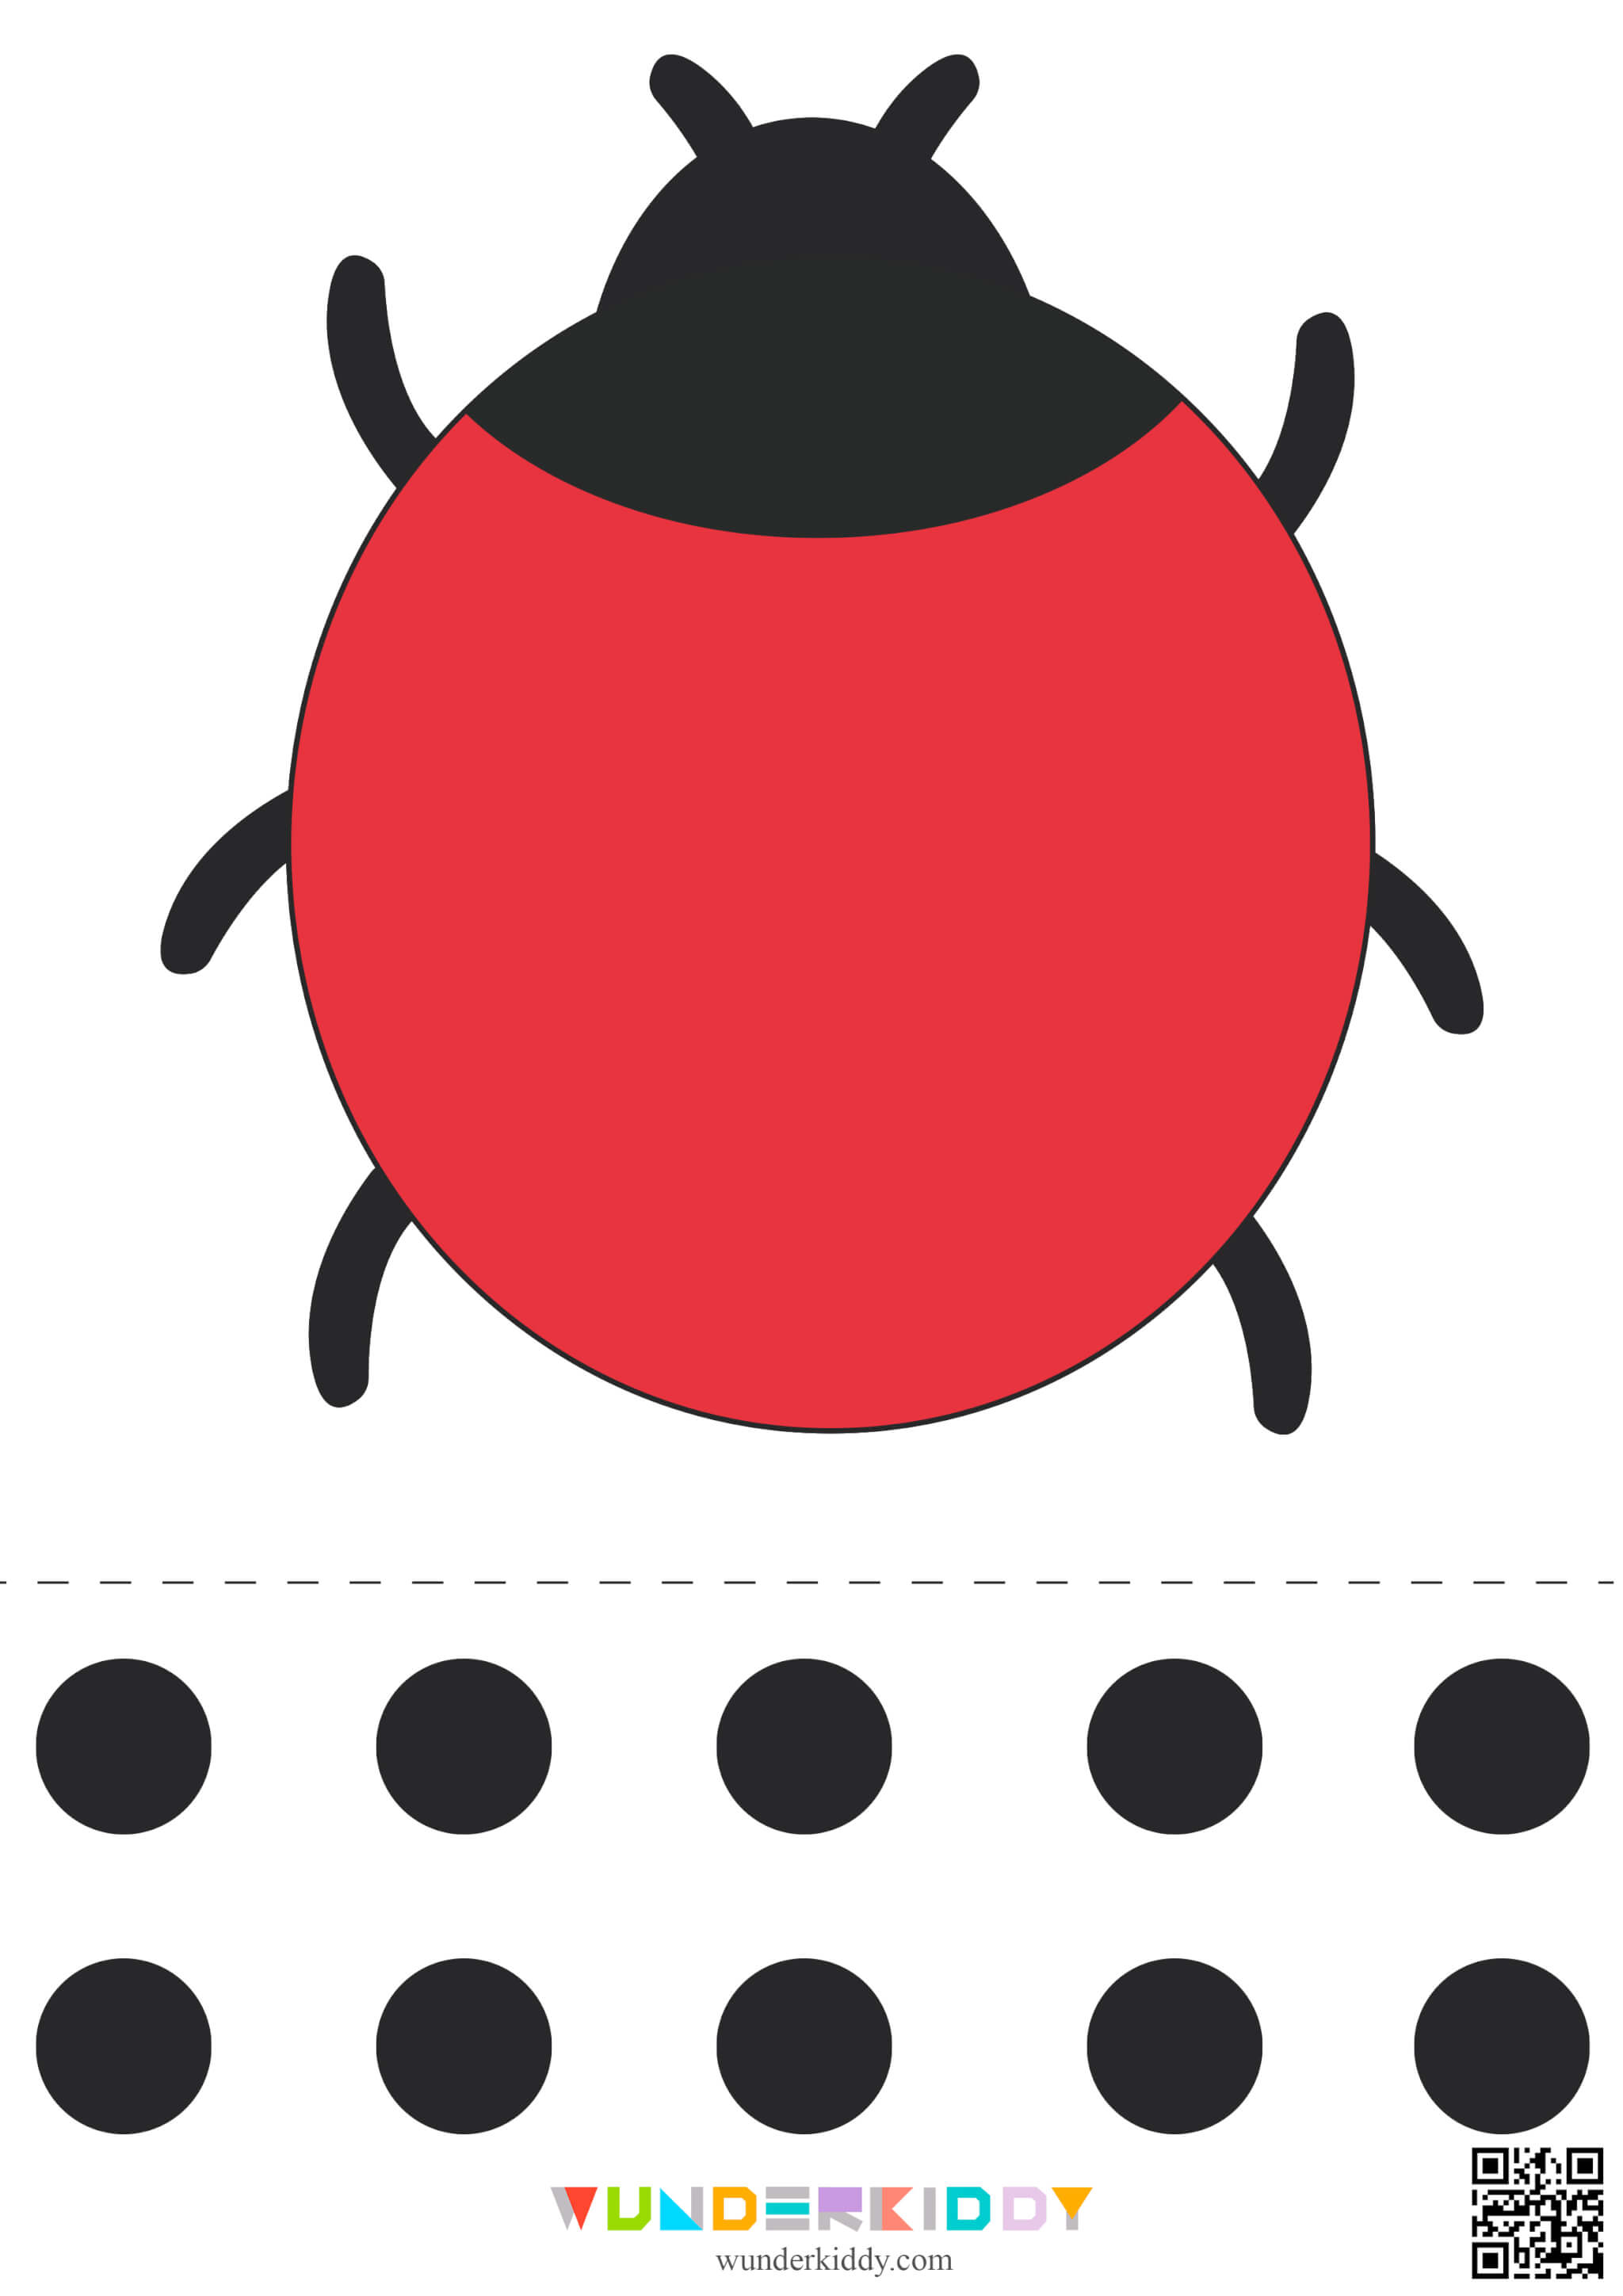 Ladybug Activity and Templates for Kids - Image 3